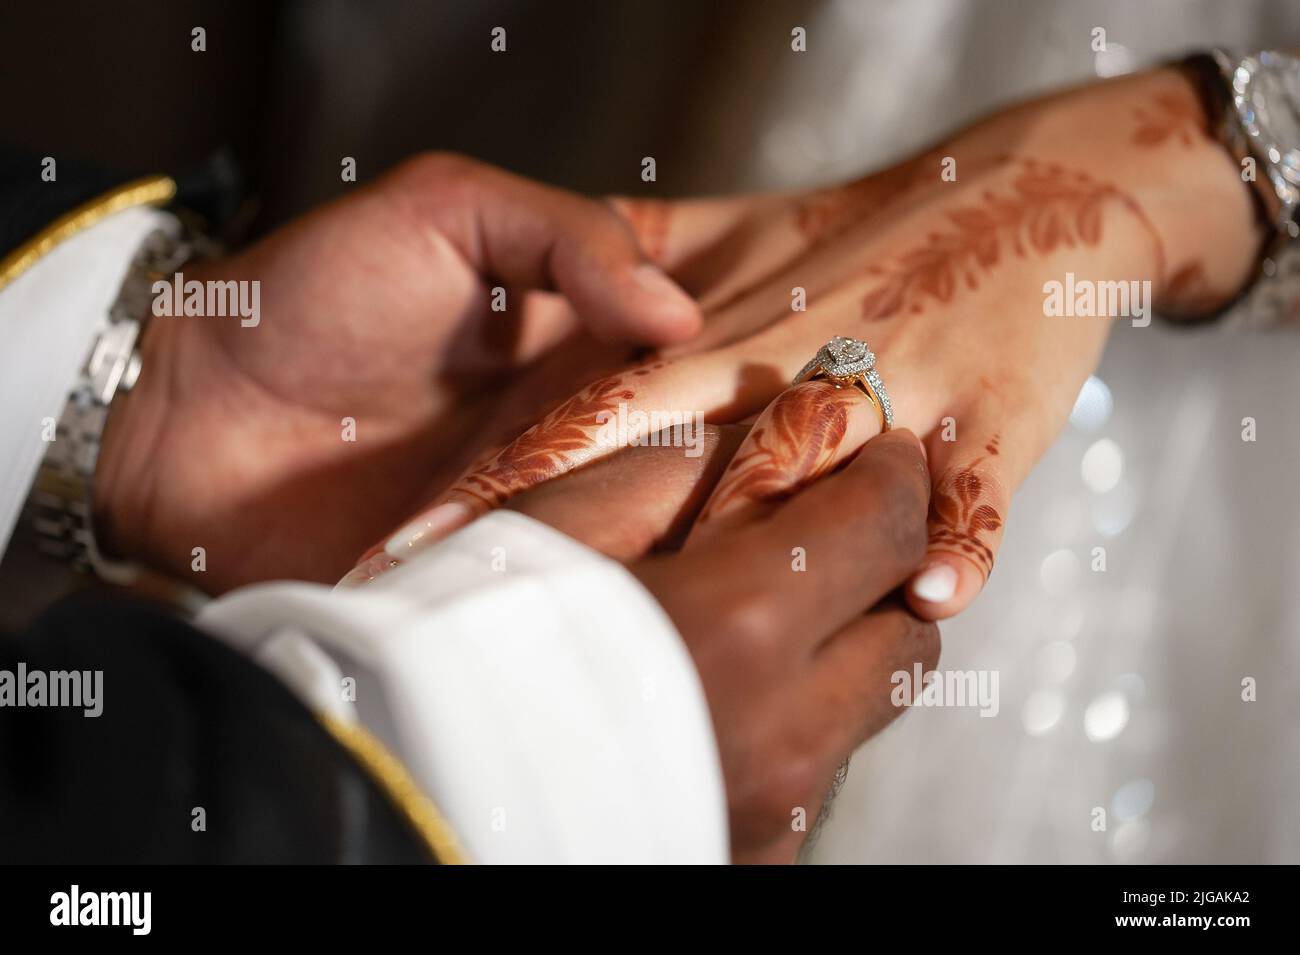 Man's hand slides diamond teardrop ring onto woman's finger. Arabic wedding with groom wearing bisht over kandora and bride's hands with henna tattoo. Stock Photo